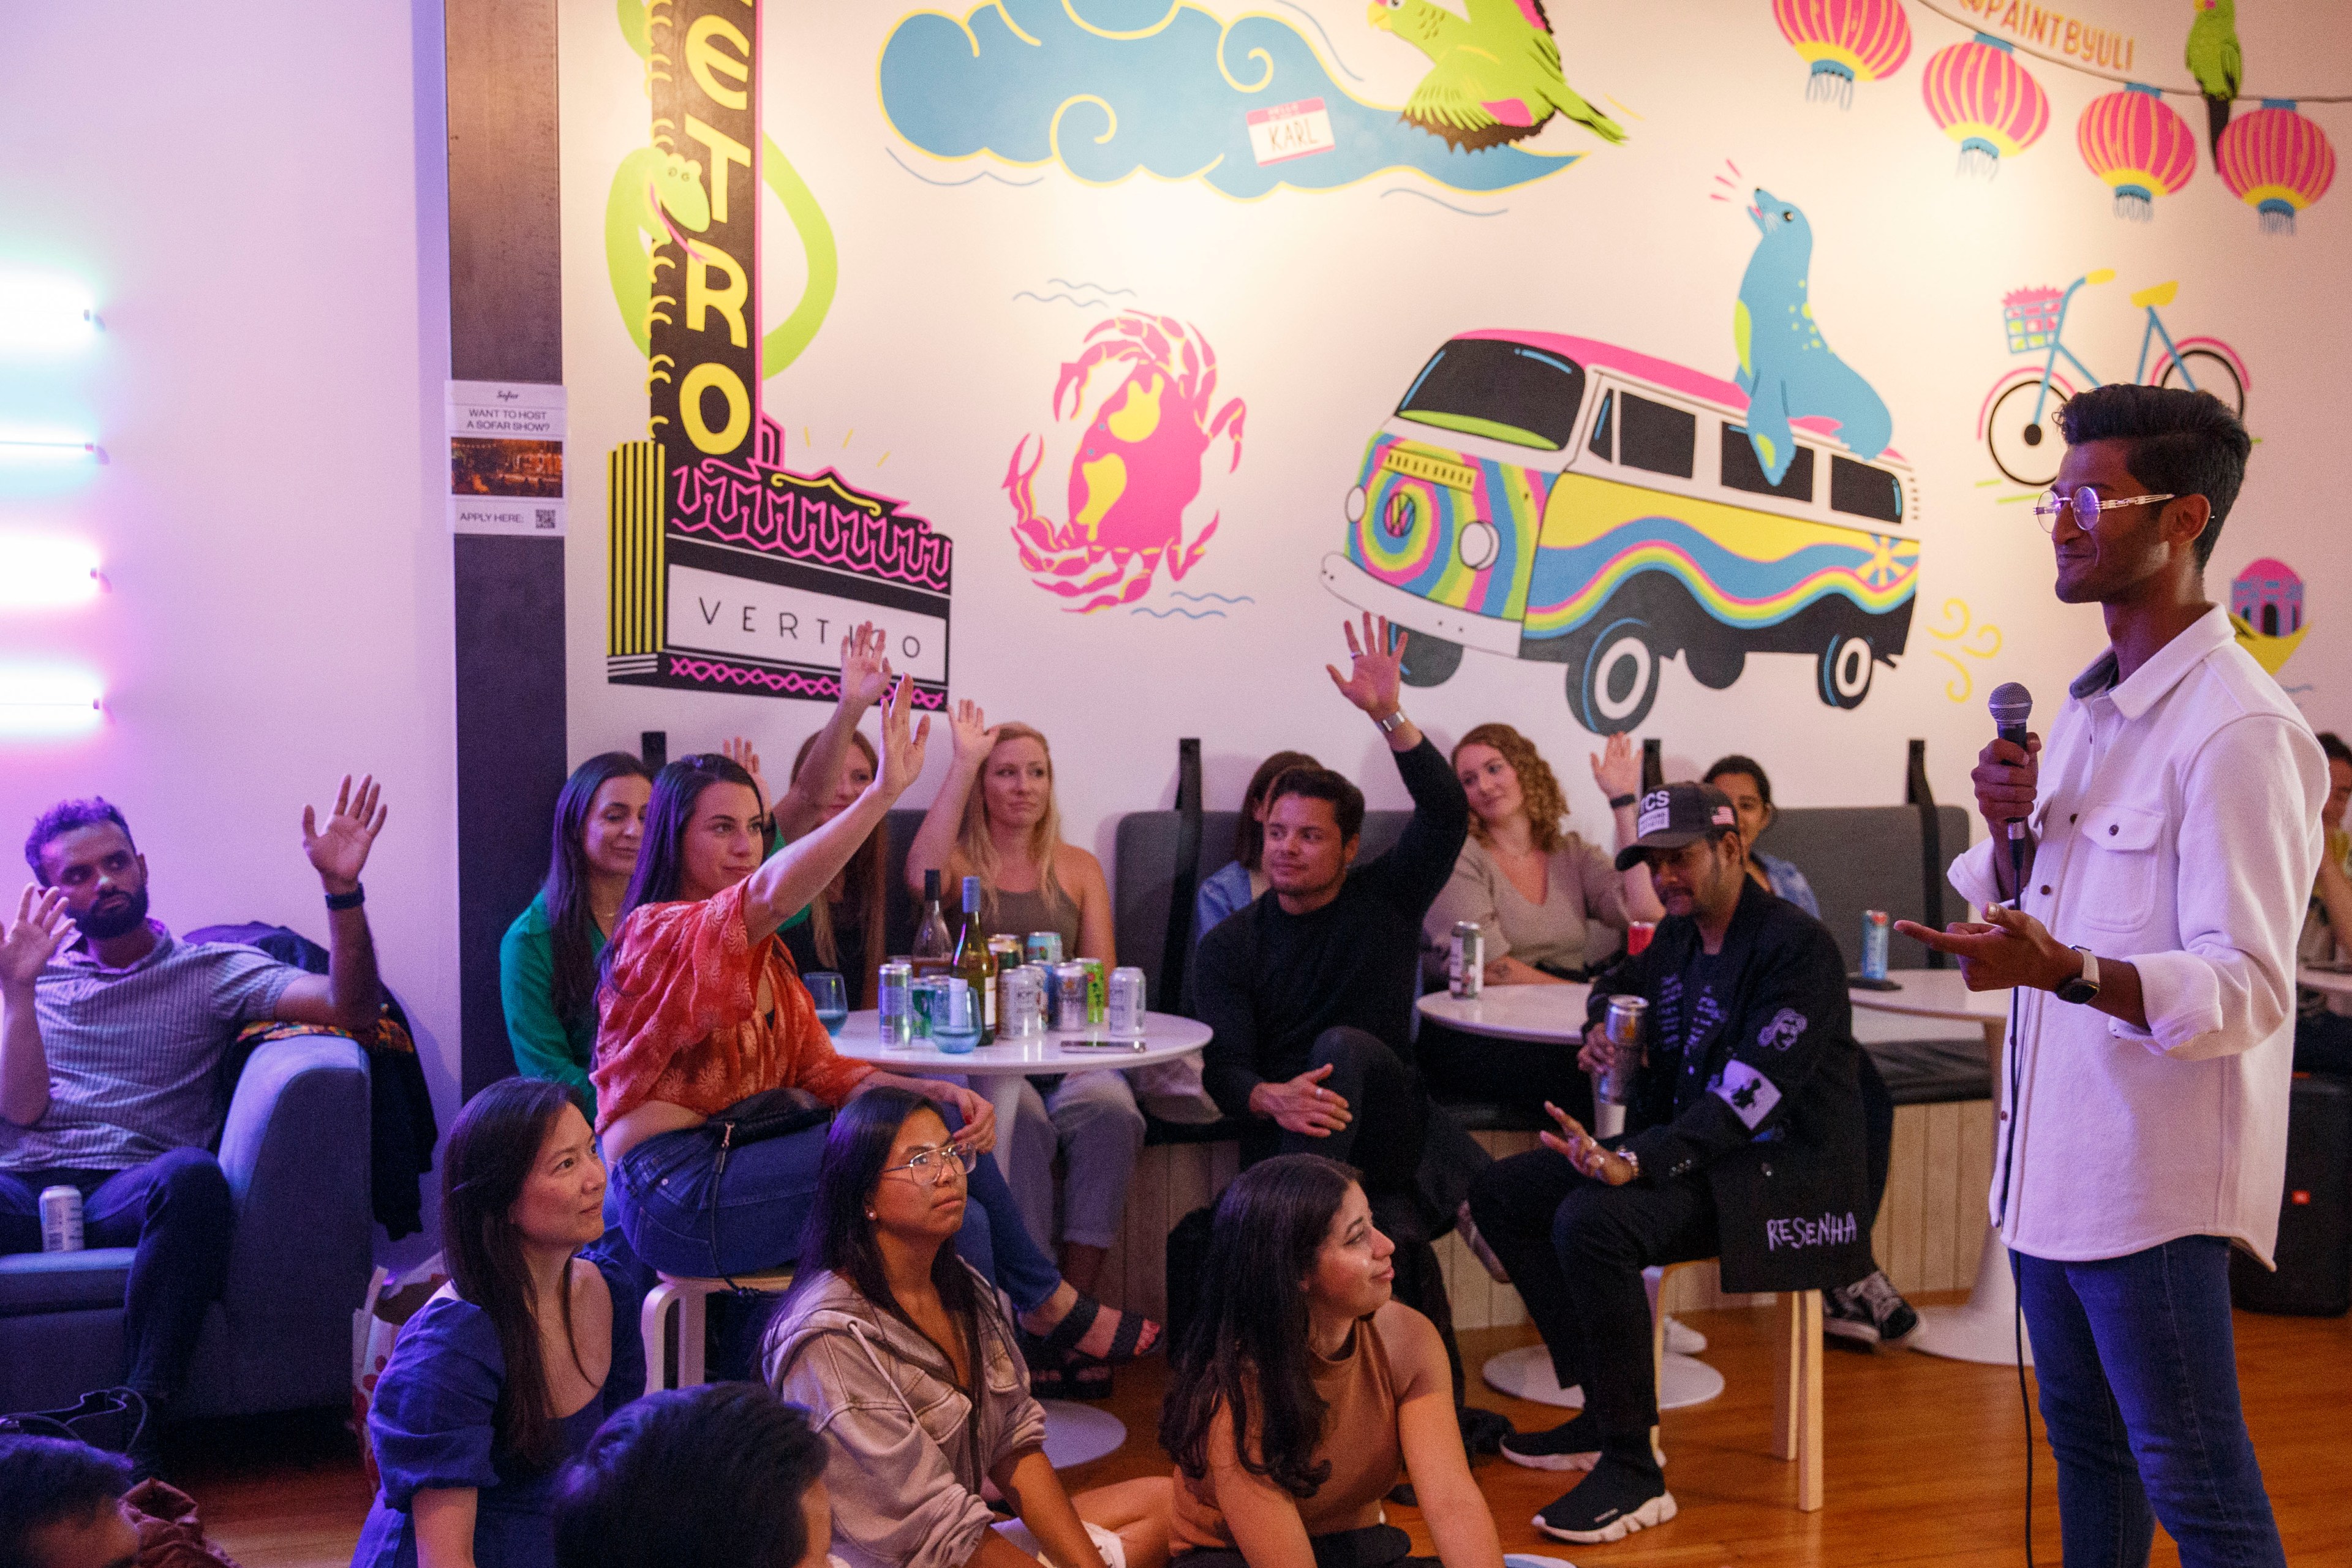 In a lounge space with fun wallpaper that includes a pink crab, a blue sea lion on a Volkswagon bus about a dozen people listen to a man holding a microphone who stands off to the right. Some of the people are seated on the floor and some are seated on chairs and roughly half the people are raises their hands in the air.